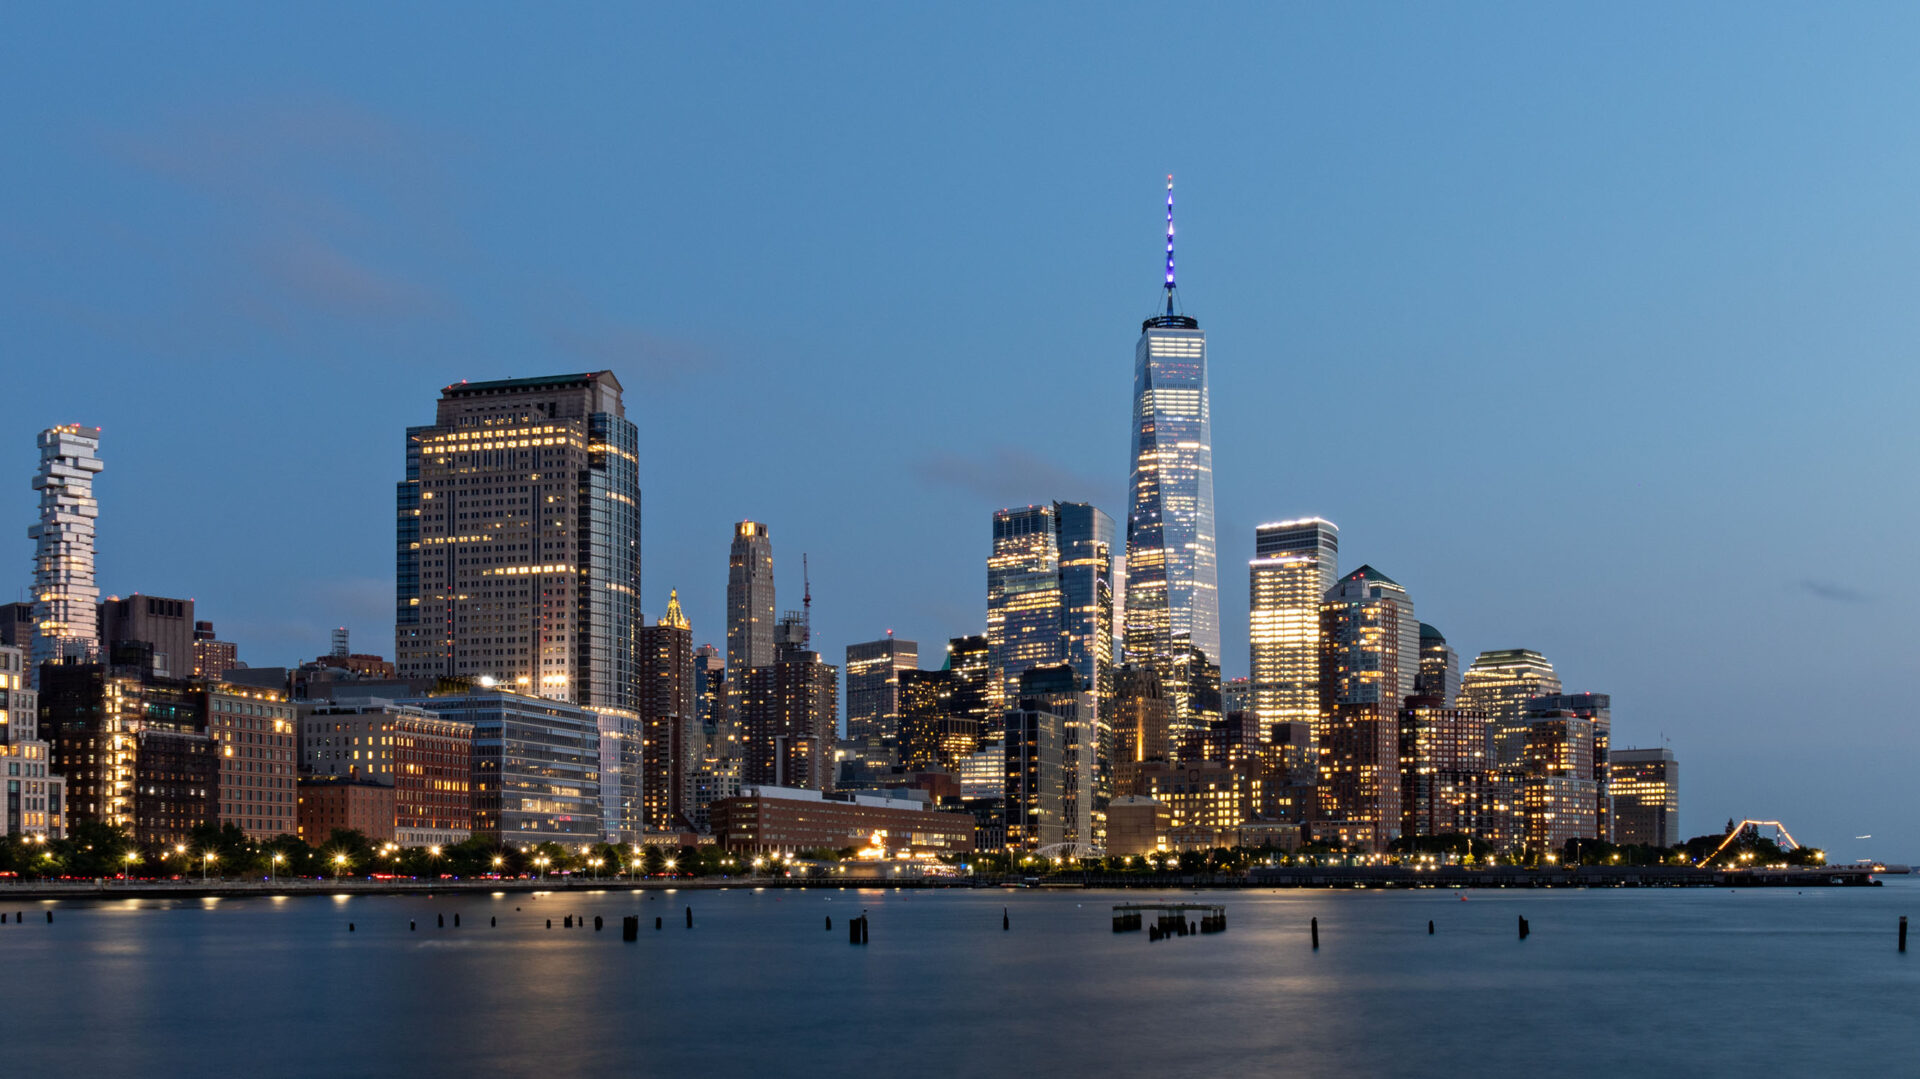 Downtown New York City after sunset